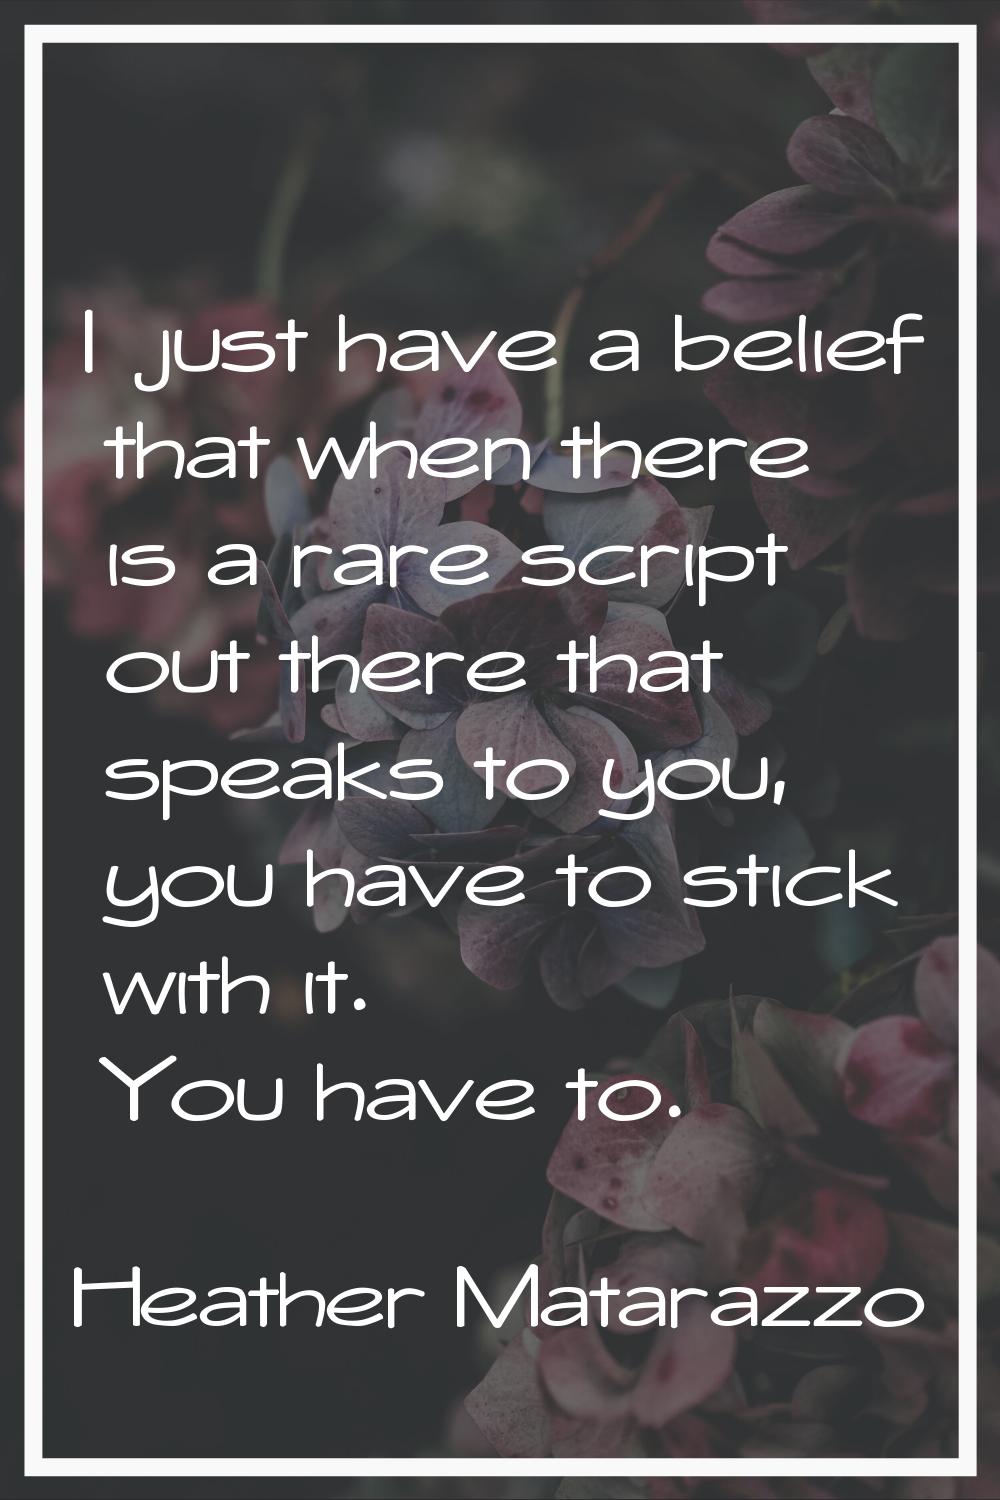 I just have a belief that when there is a rare script out there that speaks to you, you have to sti